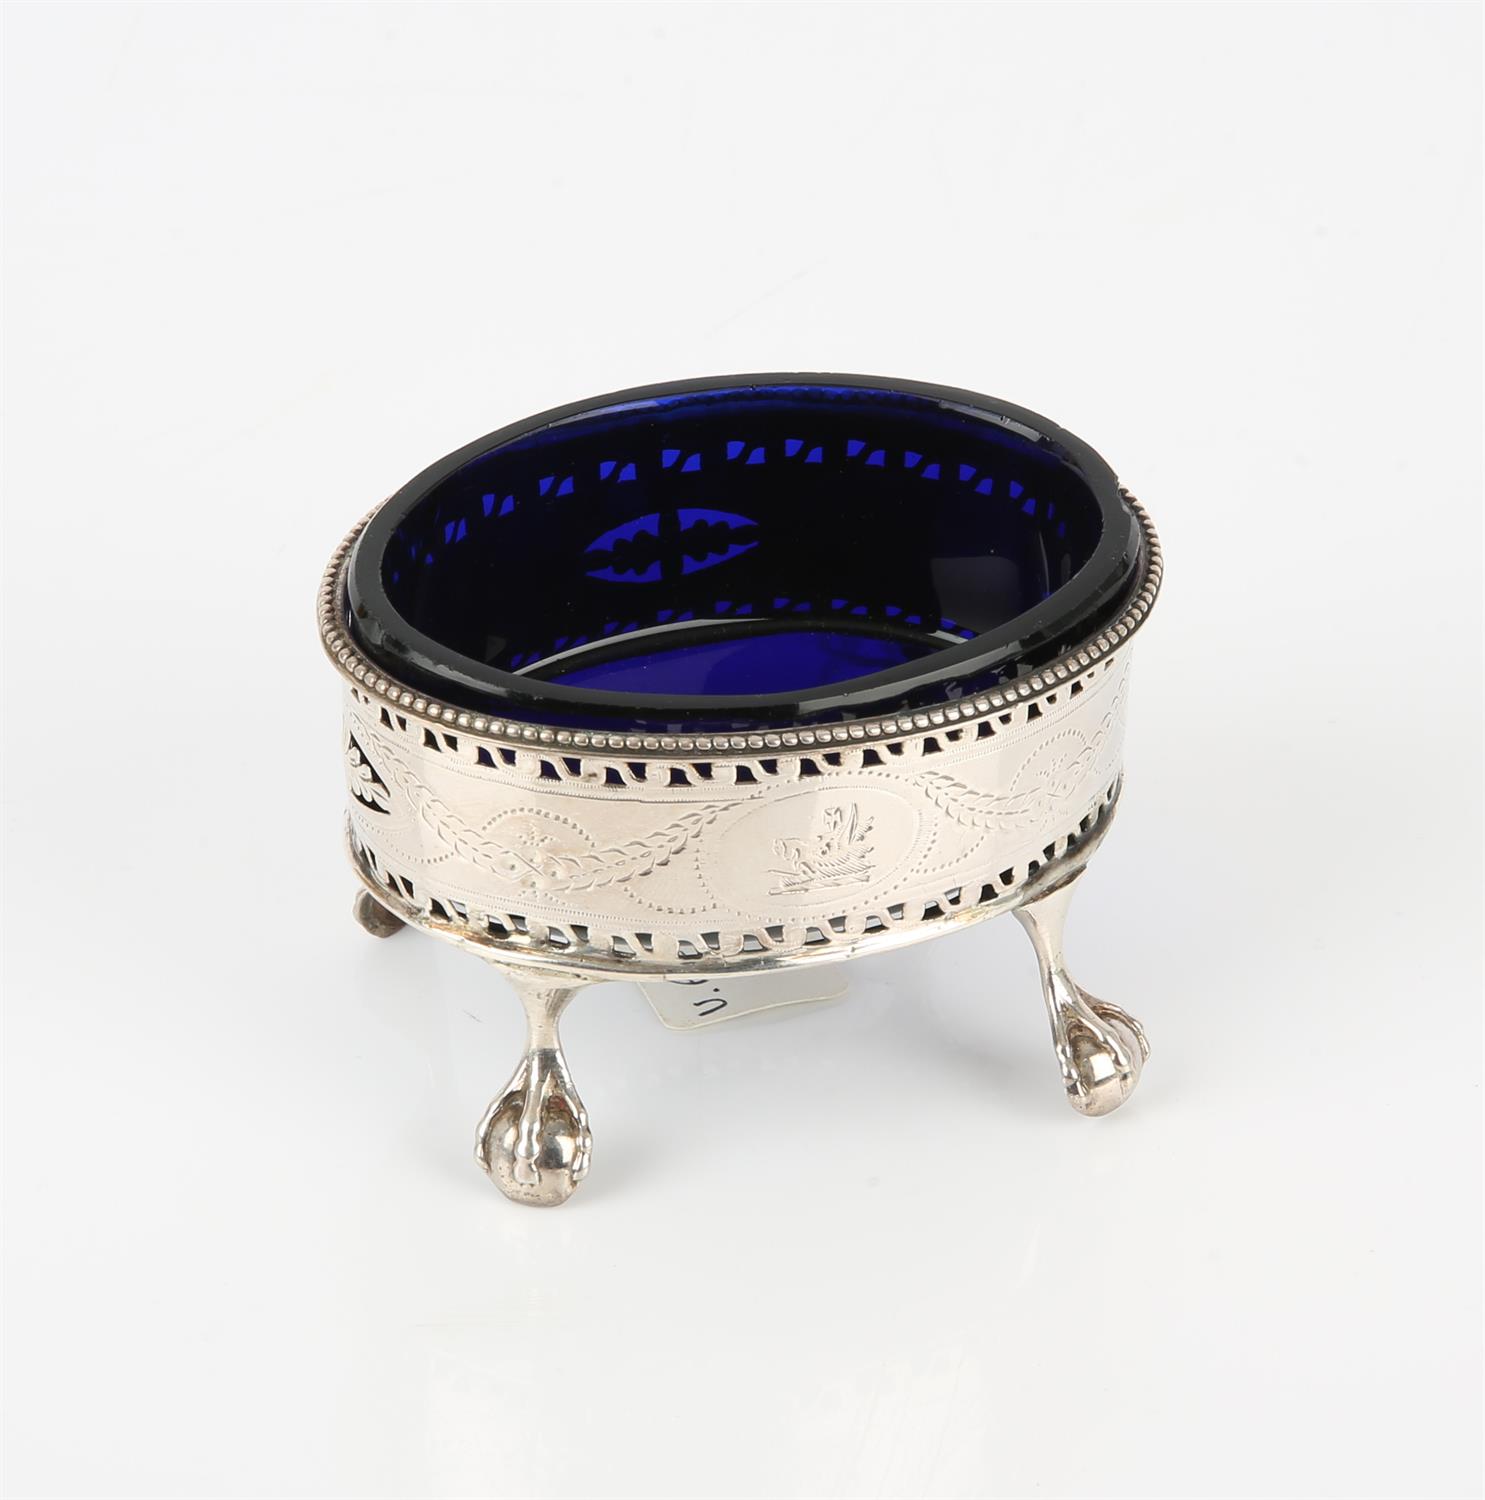 George III oval silver salt with pierced decoration, by Hester Bateman, blue glass liner, 1.